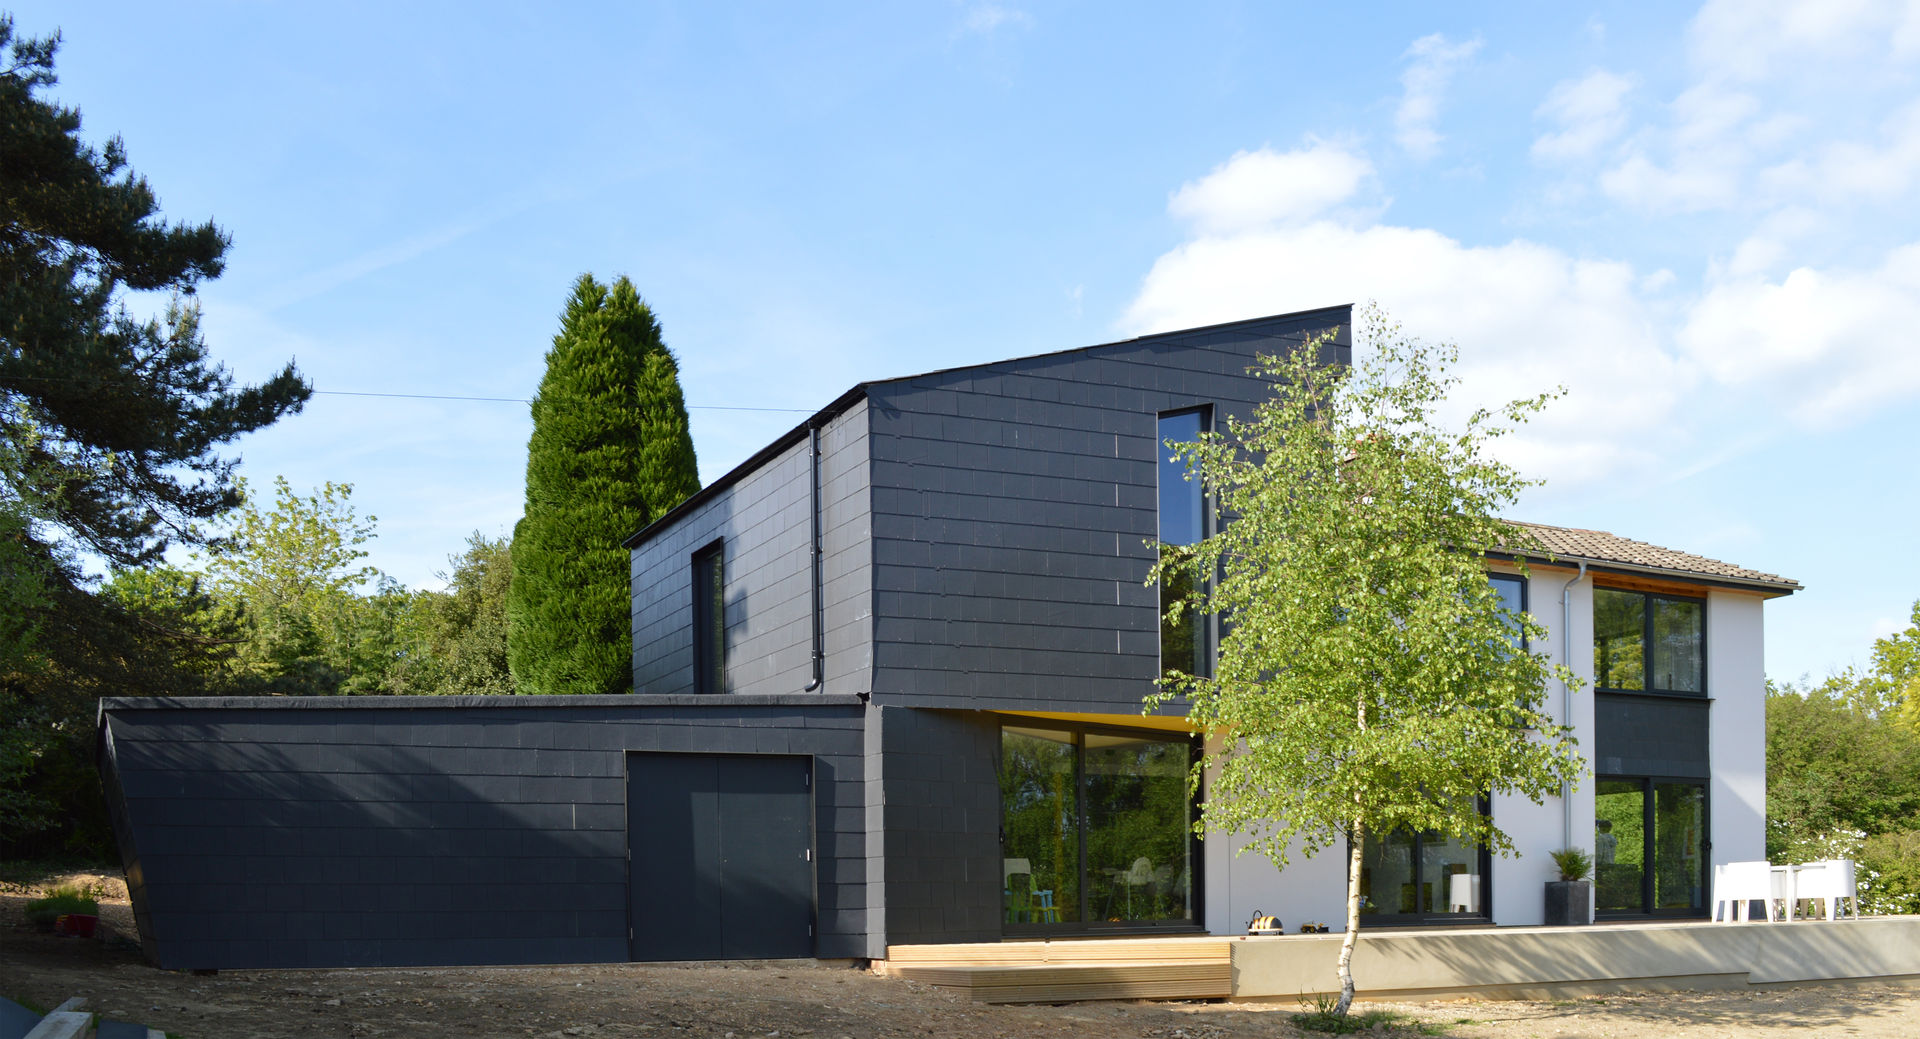 Transforming a 1960s Detached Property, Haslemere, Surrey, ArchitectureLIVE ArchitectureLIVE Будинки